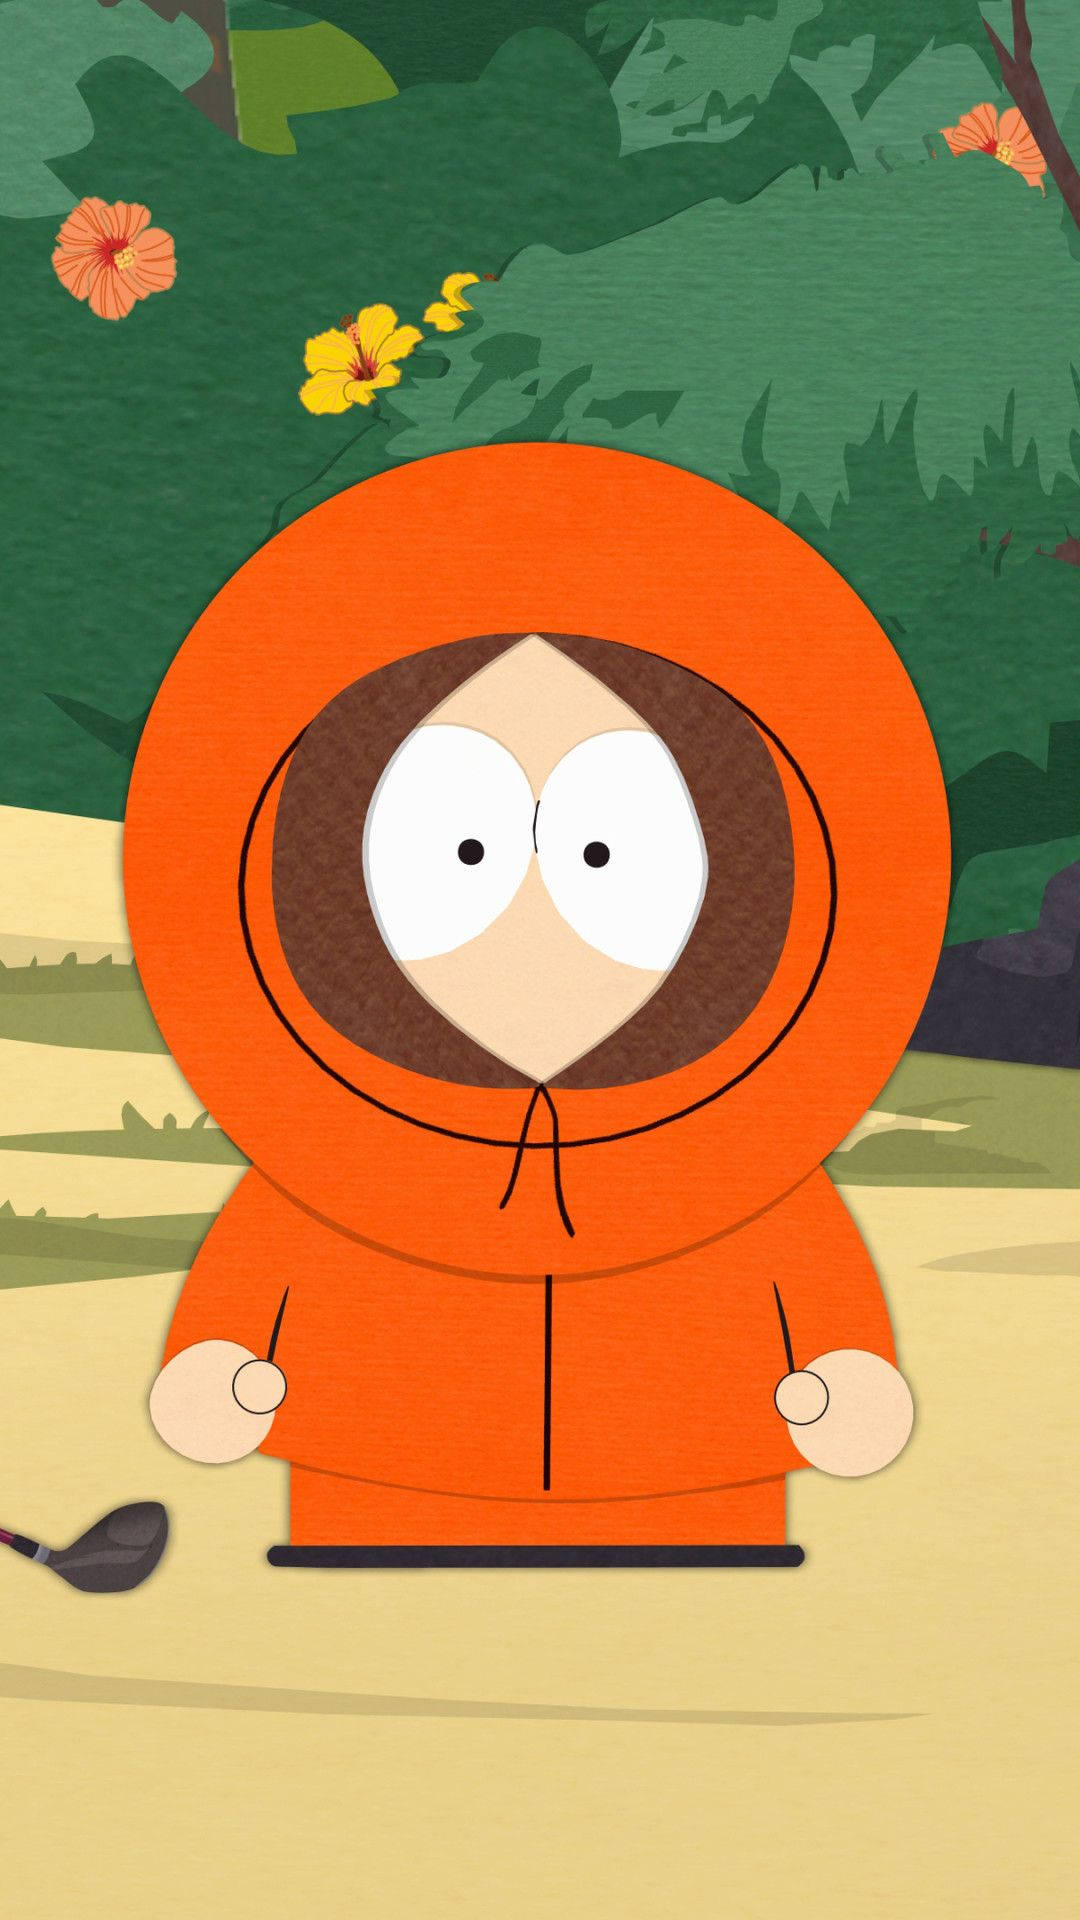 Kenny Mccormick In The Garden